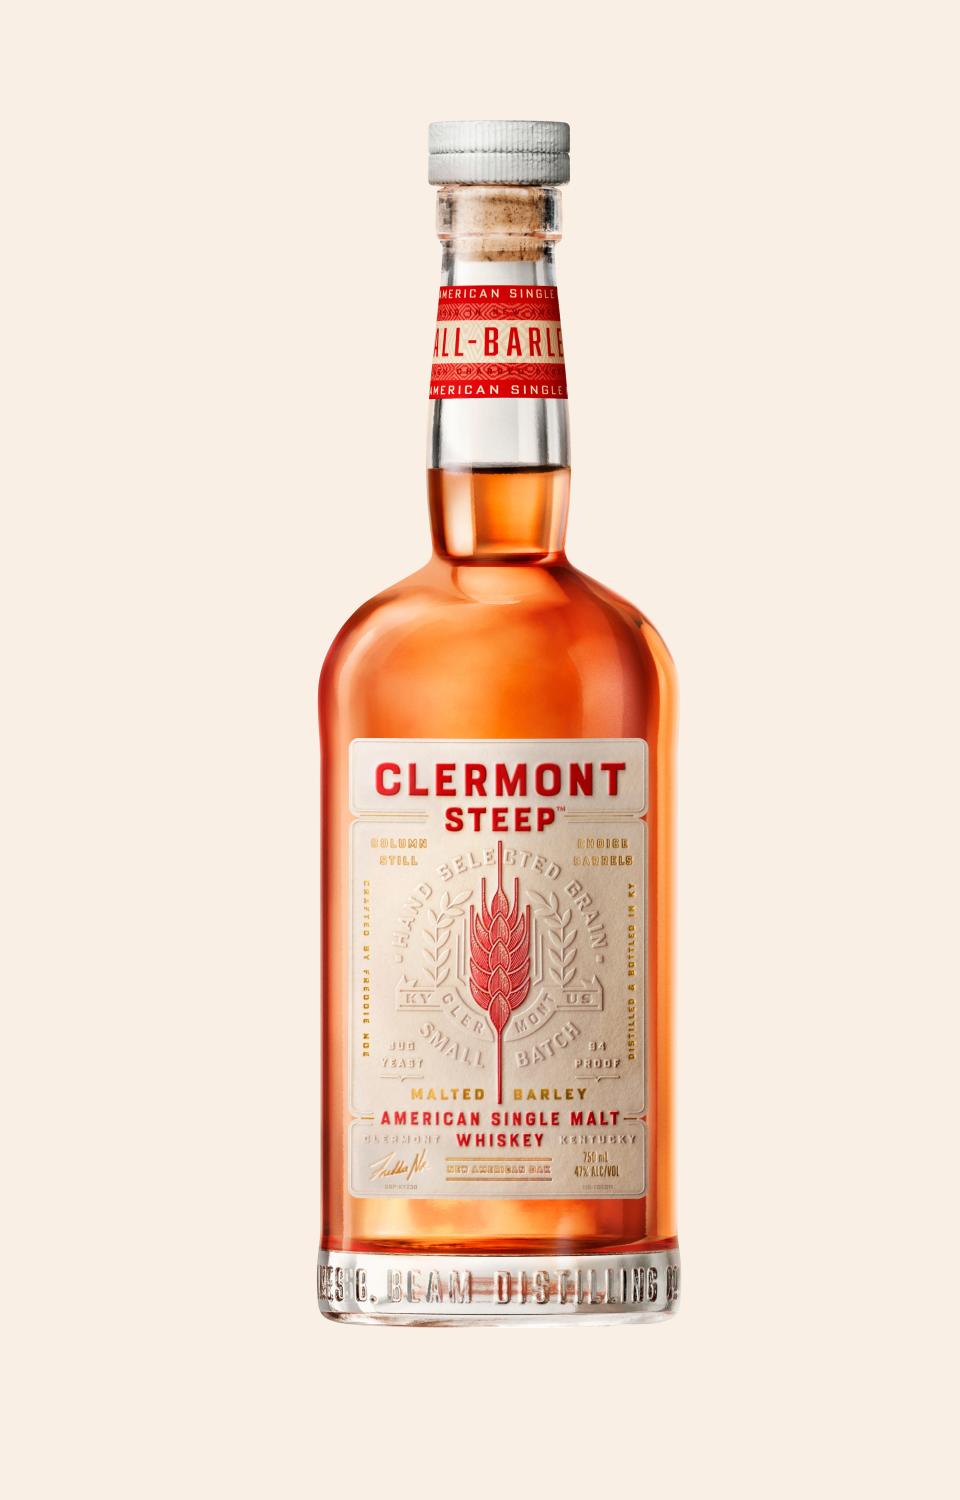 Clermont Steep is an American Single Malt Whiskey, the first released from the James B. Beam Distilling Co. under Freddie Noe, 8th Generation Master Distiller of the Fred B. Noe Distillery. It retails for $59.99